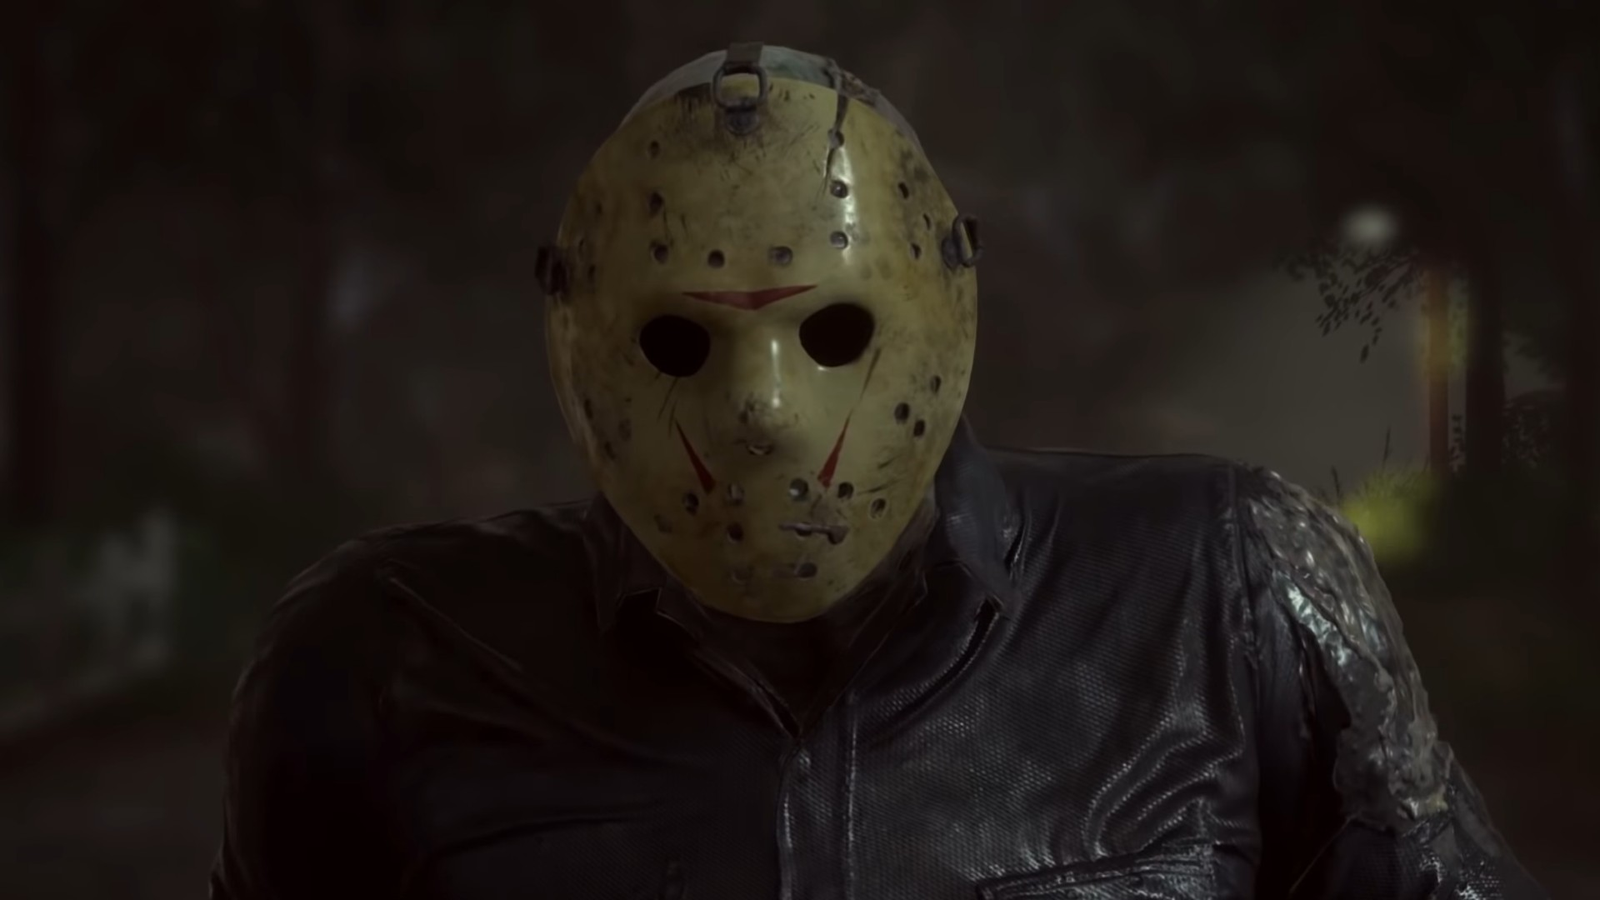 Jason Voorhees comes to Xbox One in Friday the 13th: The Game